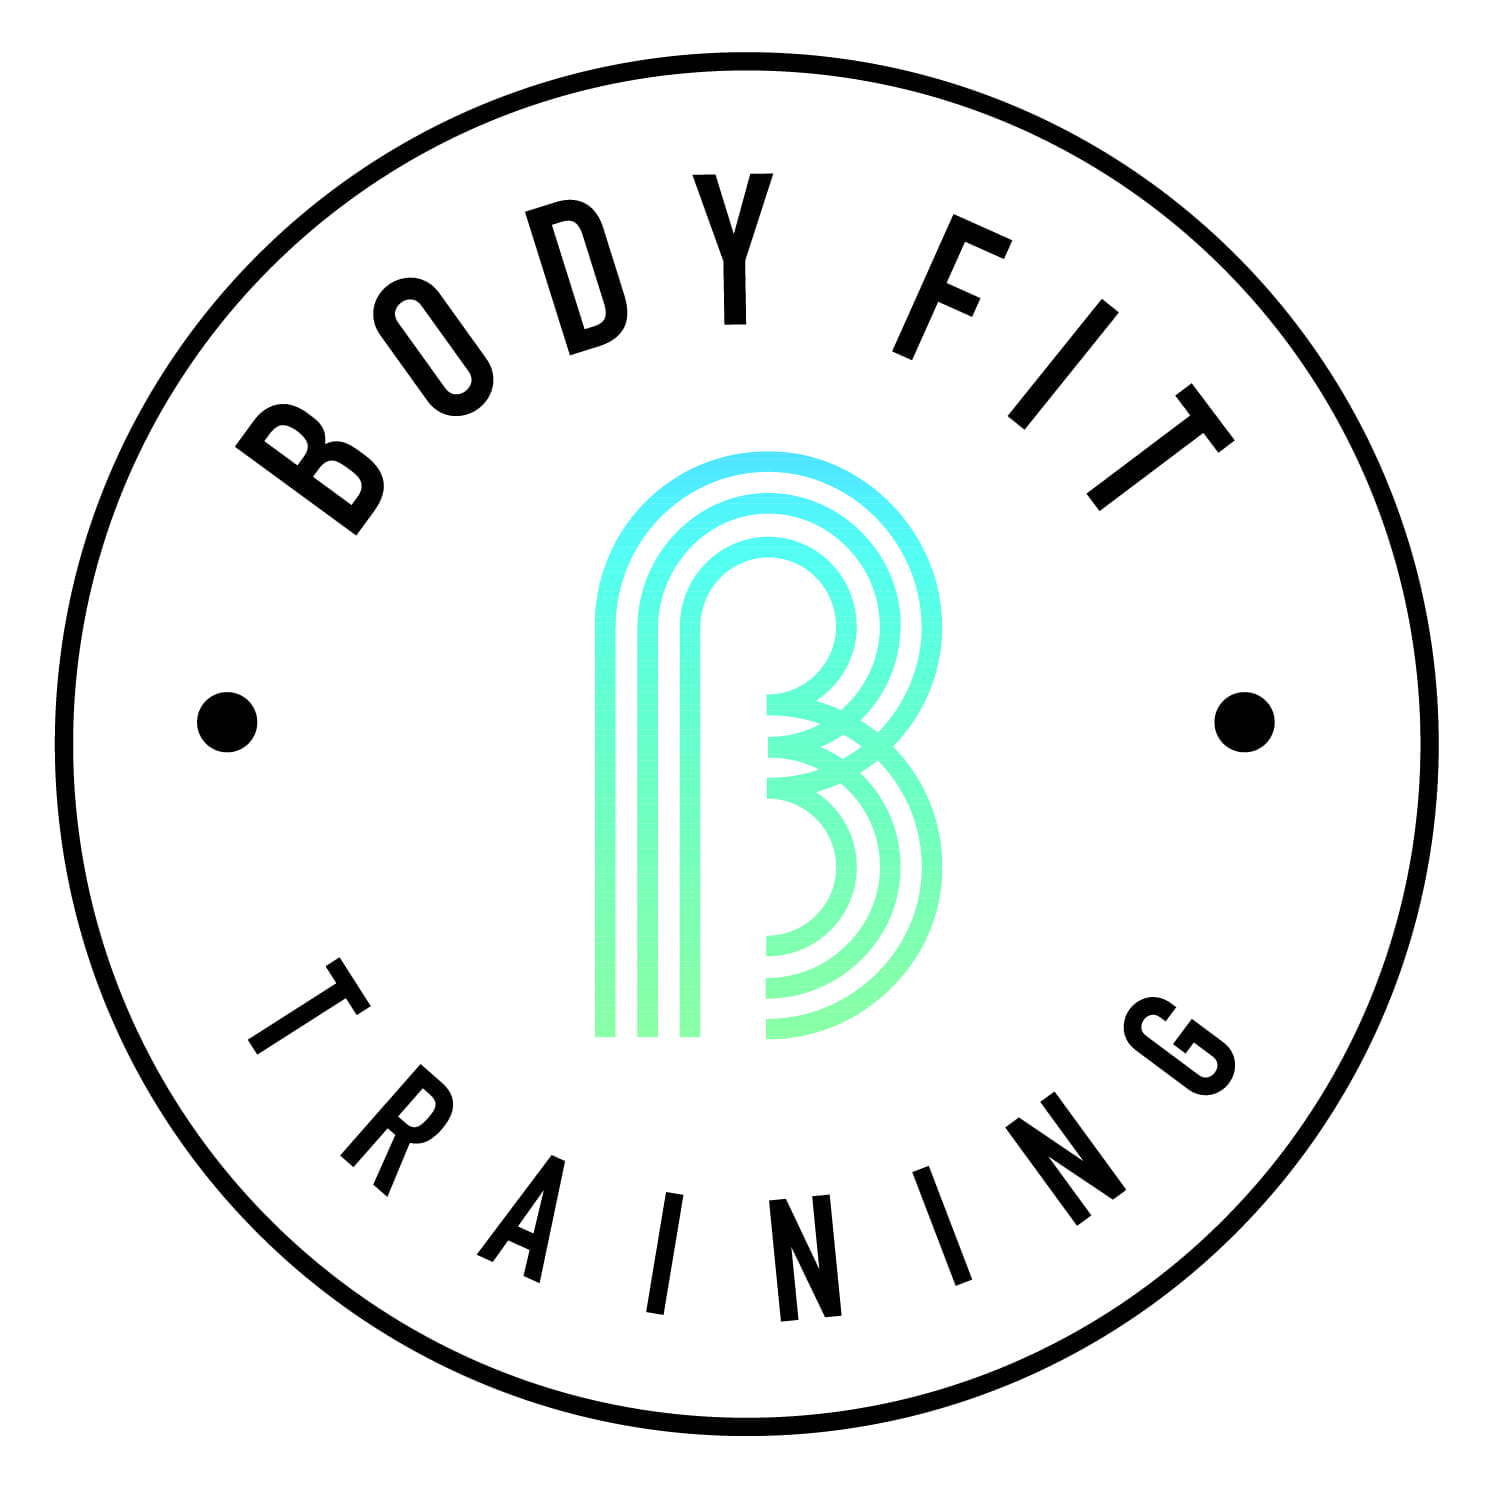 Body Fit